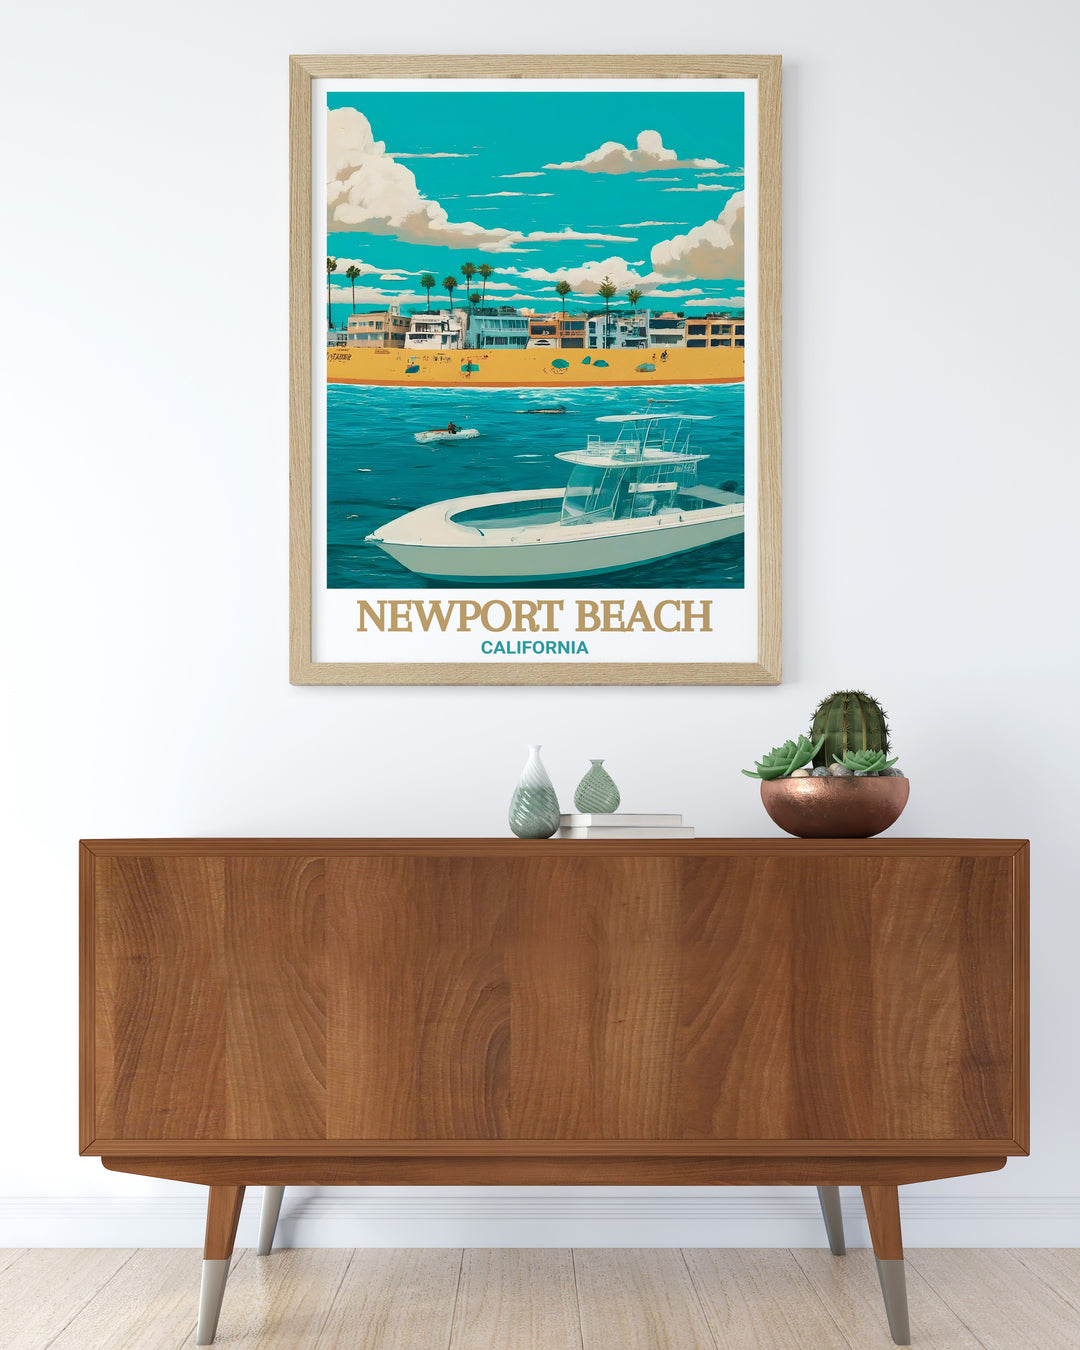 Newport Beach art print featuring Balboa Island is a stunning piece that celebrates the picturesque charm of Californias coastline. This beautiful artwork is perfect for home decor, offering a daily reminder of the tranquil beach life and lively harbor scenes.